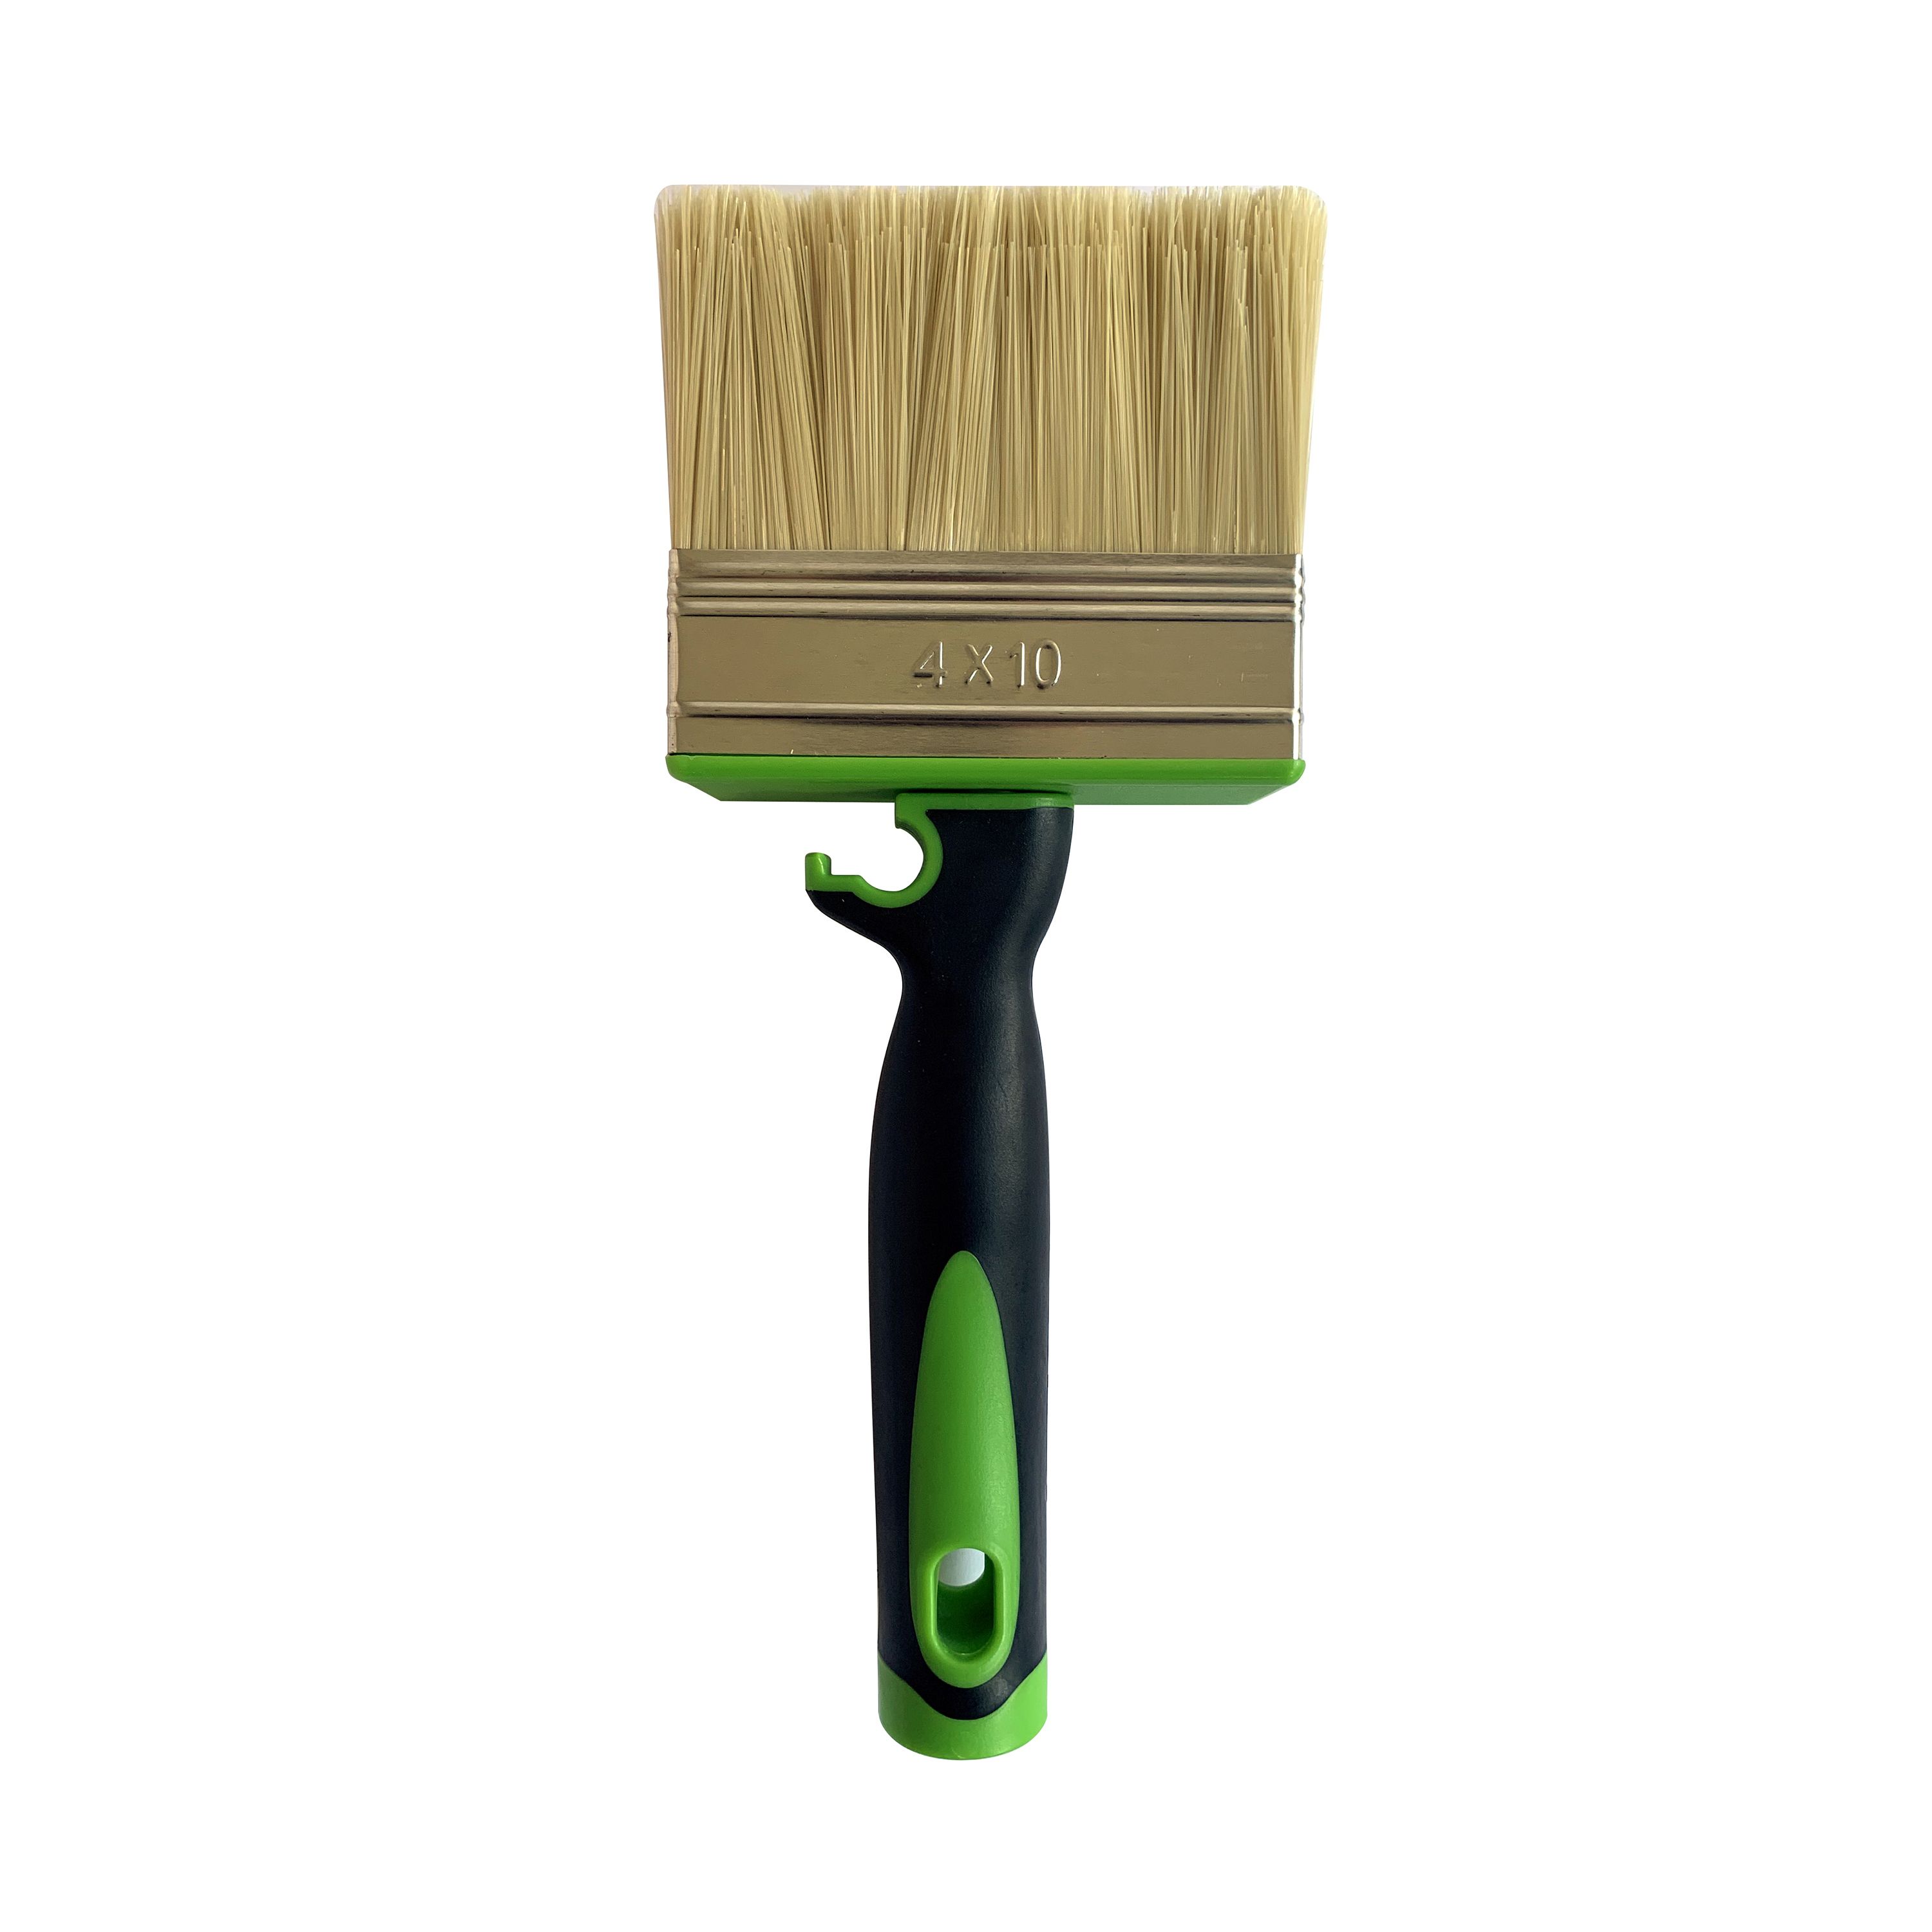 Ronseal Fence life Paint brush